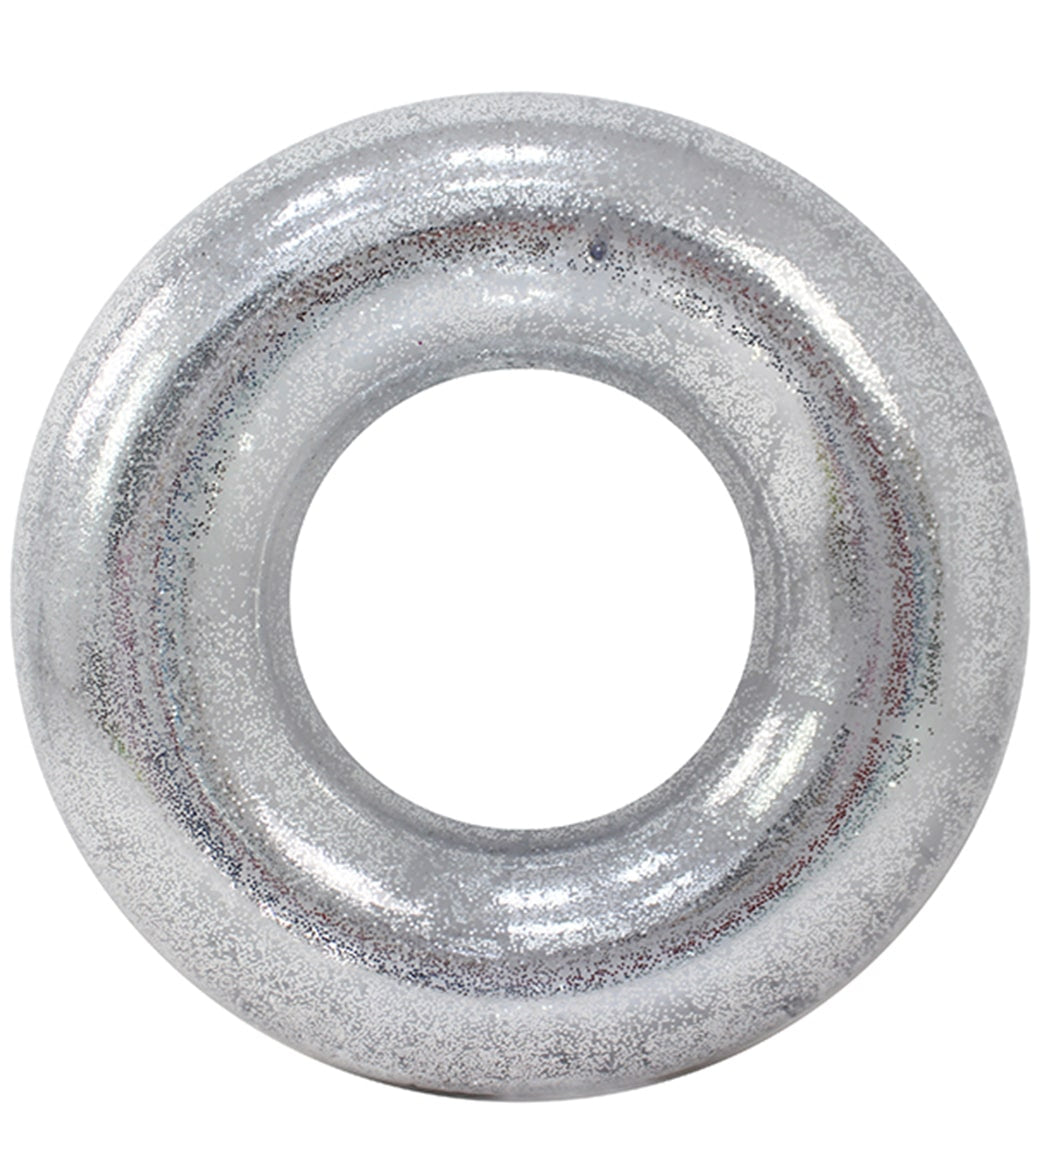 Deluxe Inflatable Pool Swim Tube with Holographic Glitter 41" Silver